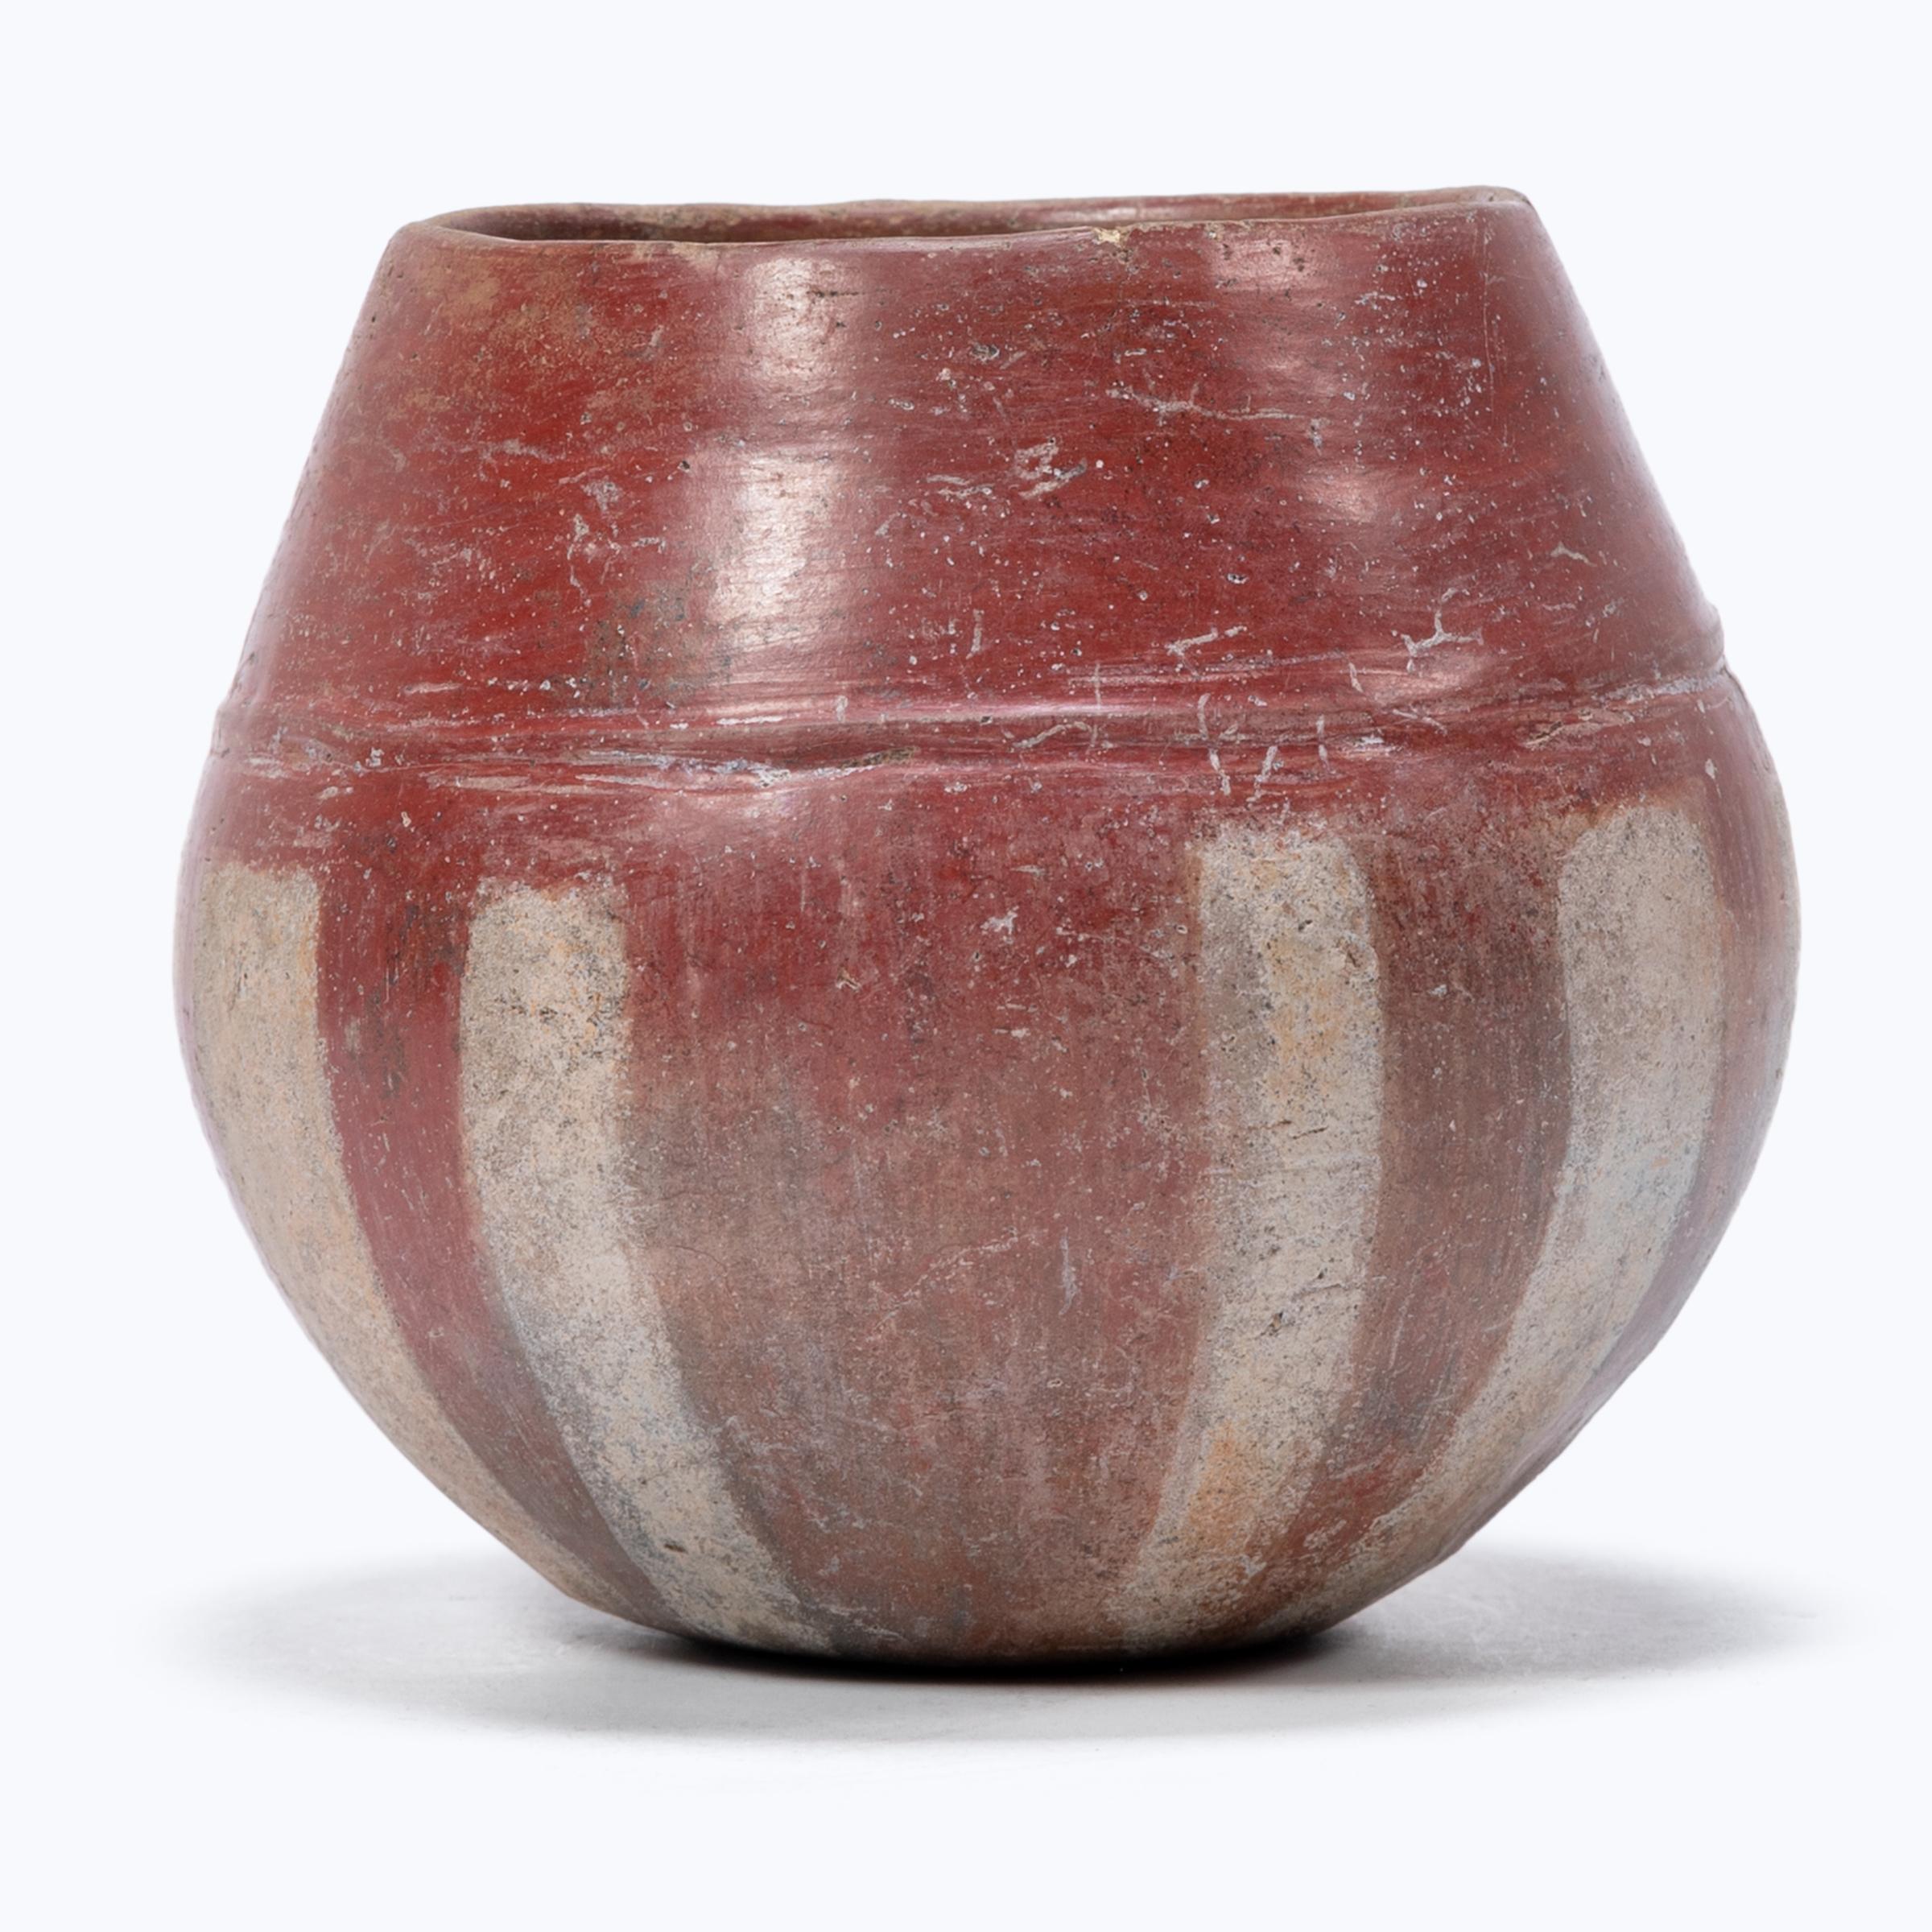 This petite ceramic vessel was made by an artisan of the Chupícuaro culture, which was settled in Guanajuanto, Mexico from 500 BC-300 AD. Exhibiting a rich patina, the bowl's surface is painted in a striped pattern with slips of buff and red clay.